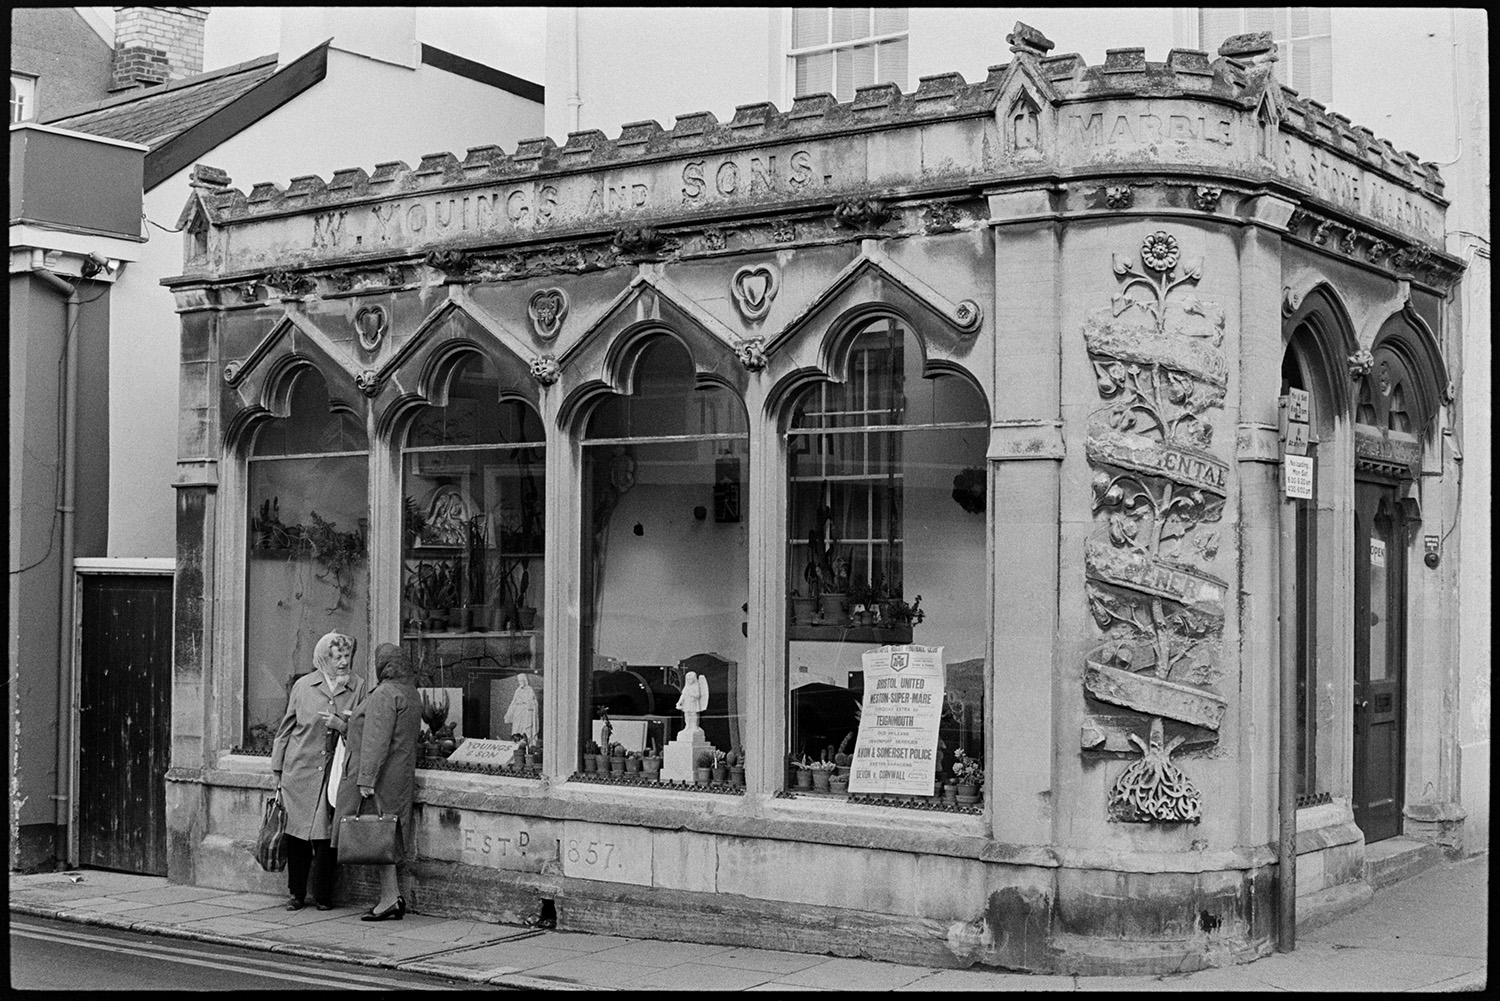 Ornately carved monumental masons premises (Victorian). 
[Two women talking outside the shop front of Youings & Son, Monumental Masons in Bear Street, Barnstaple. The shop front is ornately carved. Gravestones, statues and pot plants are visible inside the premises.]